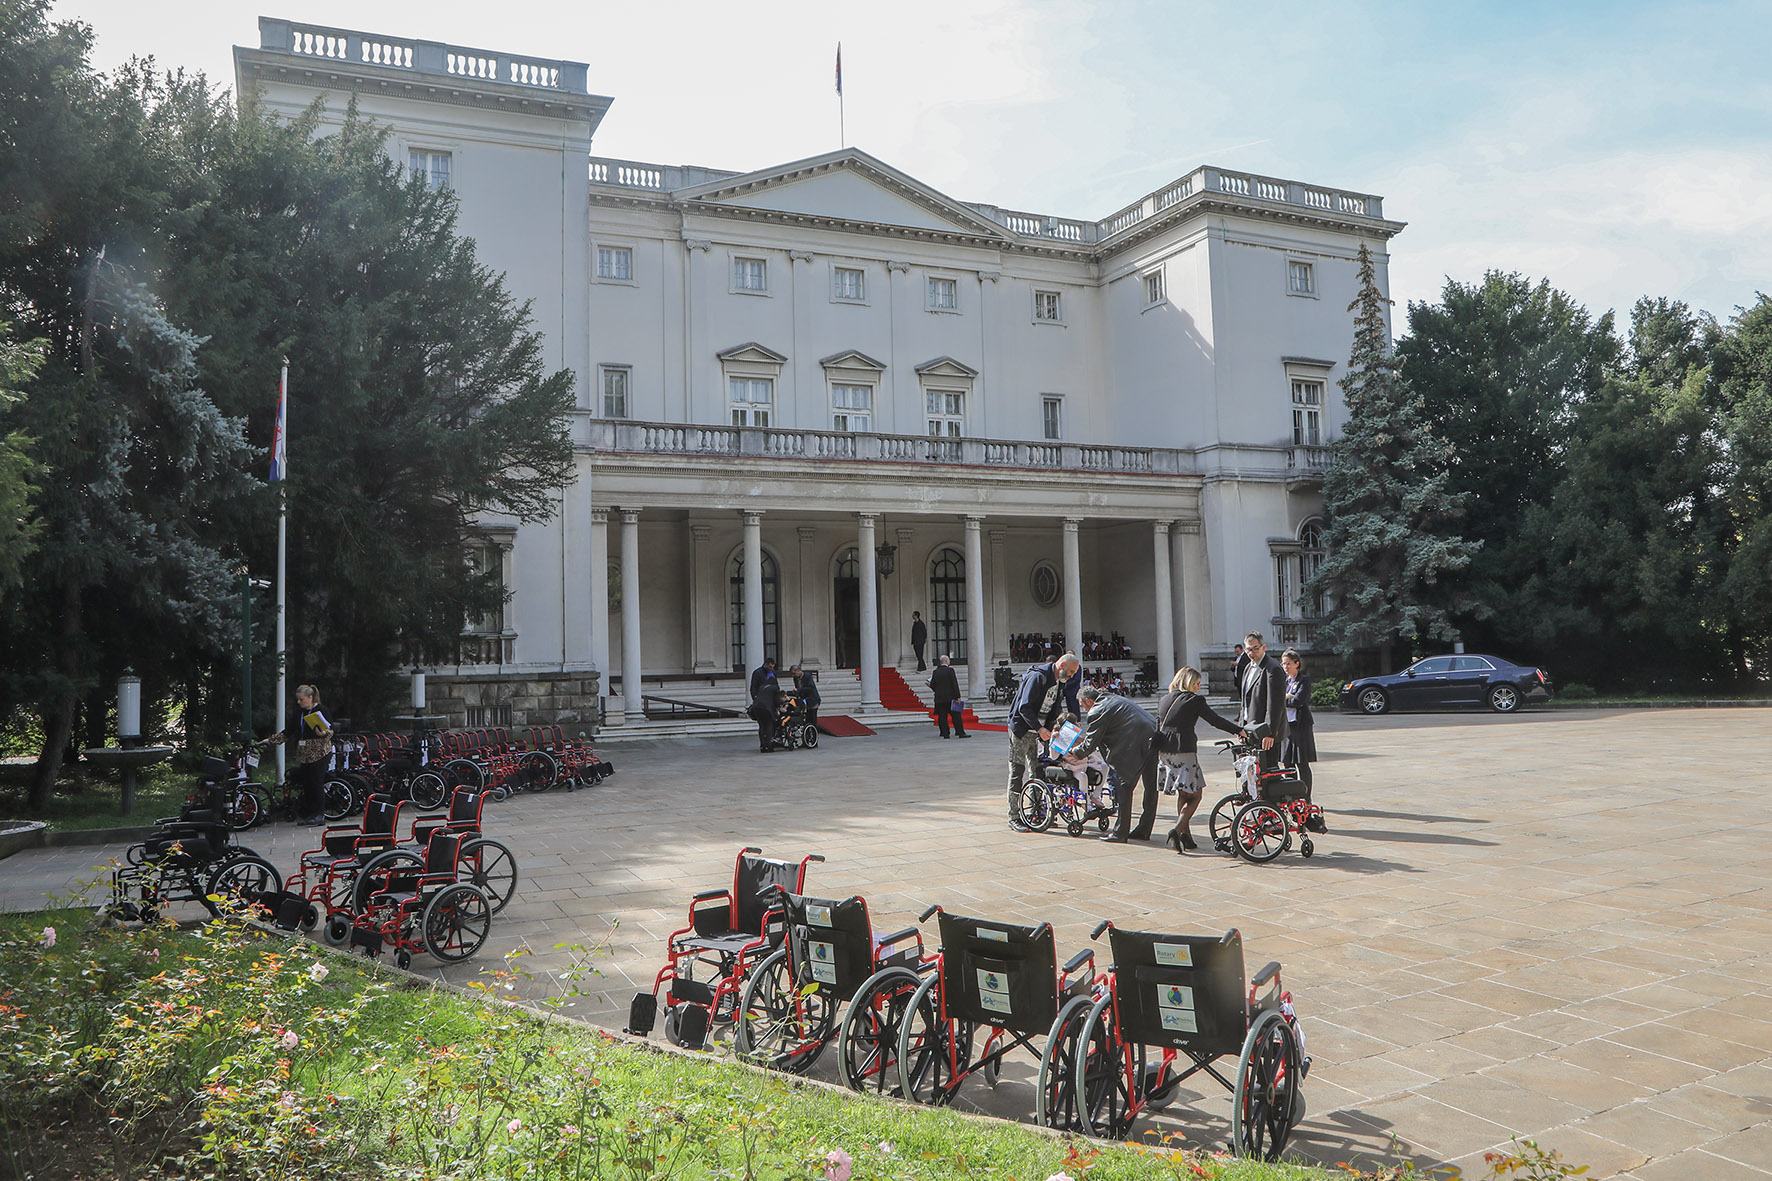 Delivery of wheelchairs at the White Palace